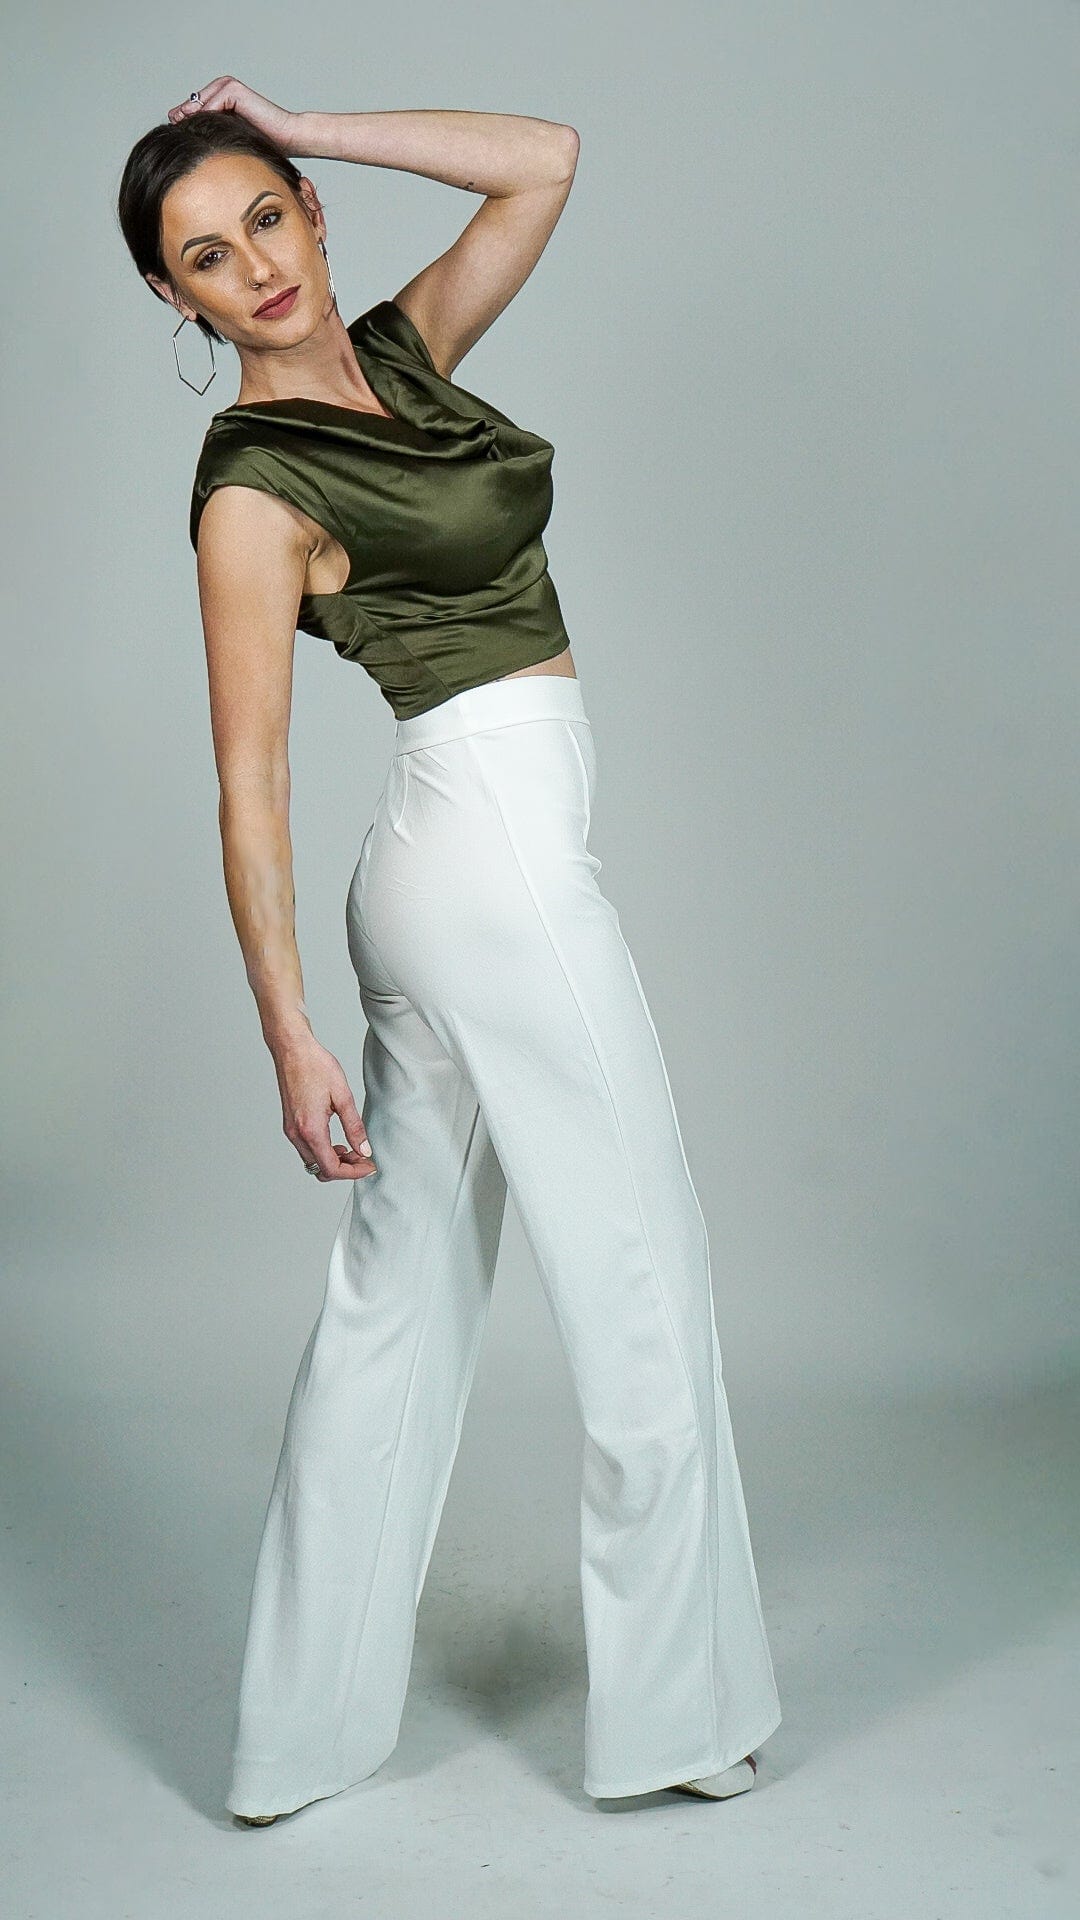 Model is wearing Olive green Satin Sleeveless Cowl Top with shoulder pads She's Elegant